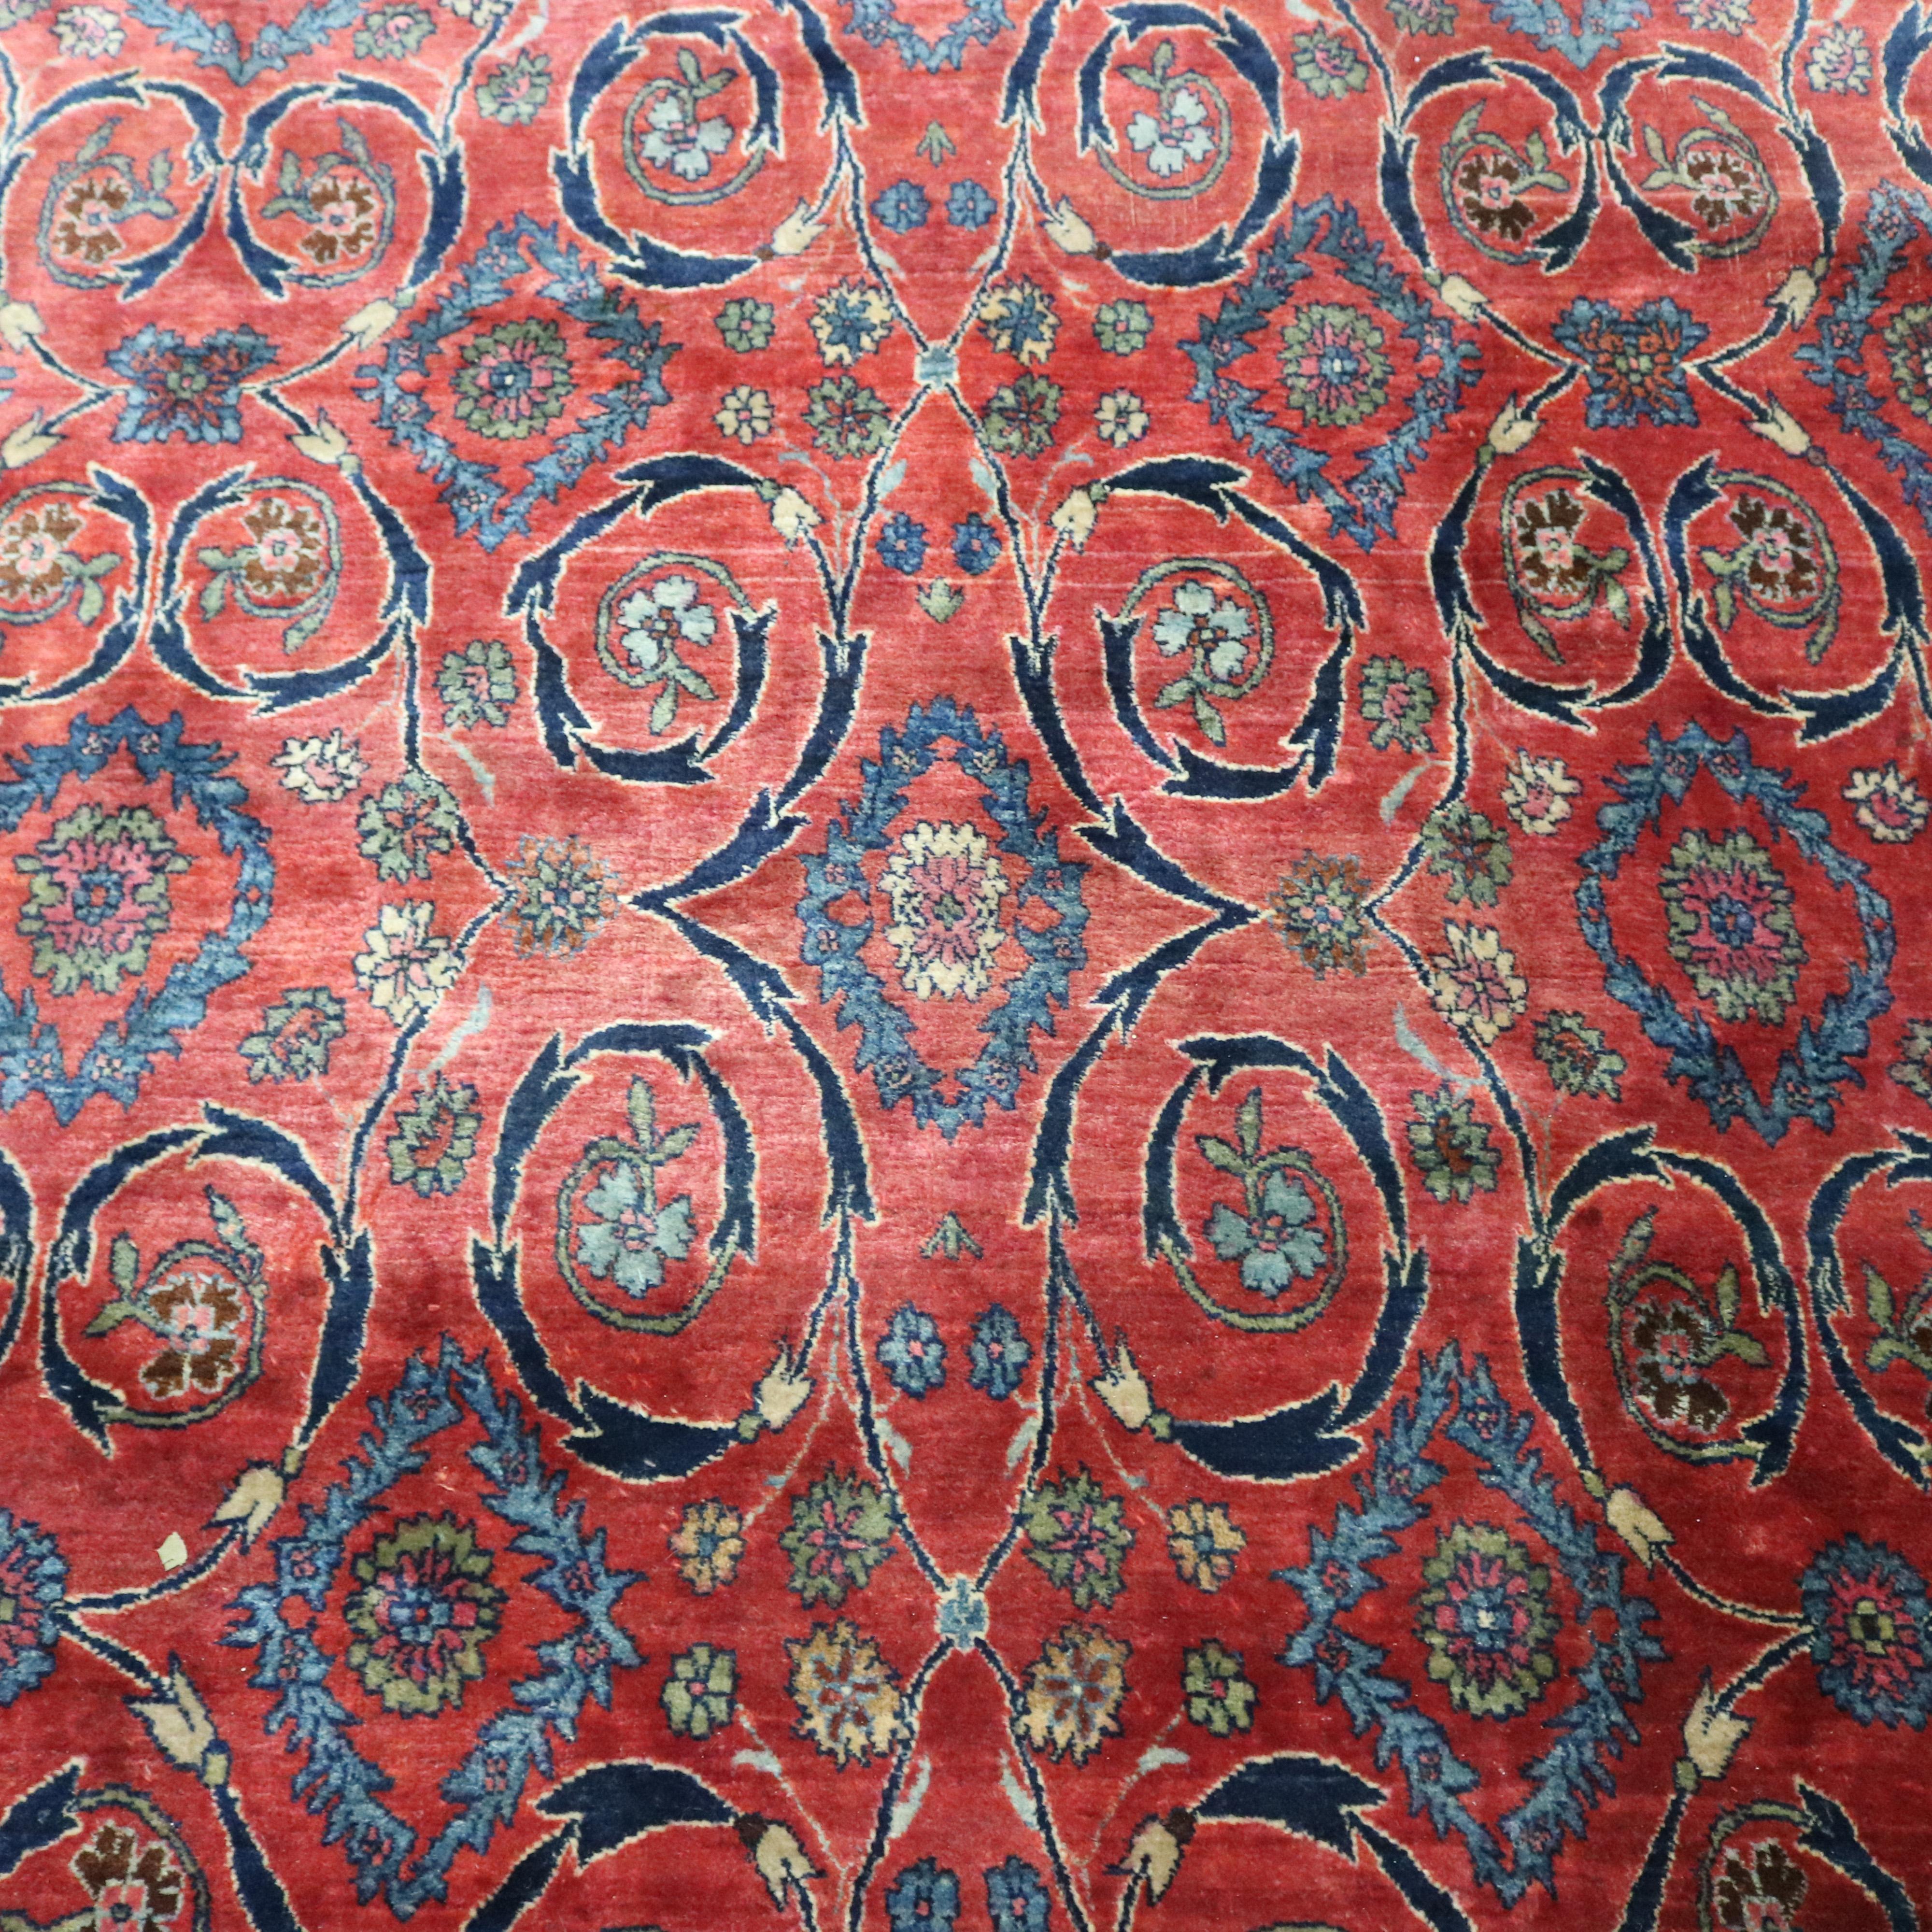 A vintage Persian Bidjar oriental carpet offers all-over scroll and foliate motif with wide border having repeating pattern of stylized flowers, circa 1930.

***DELIVERY NOTICE – Due to COVID-19 we are employing NO-CONTACT PRACTICES in the transfer